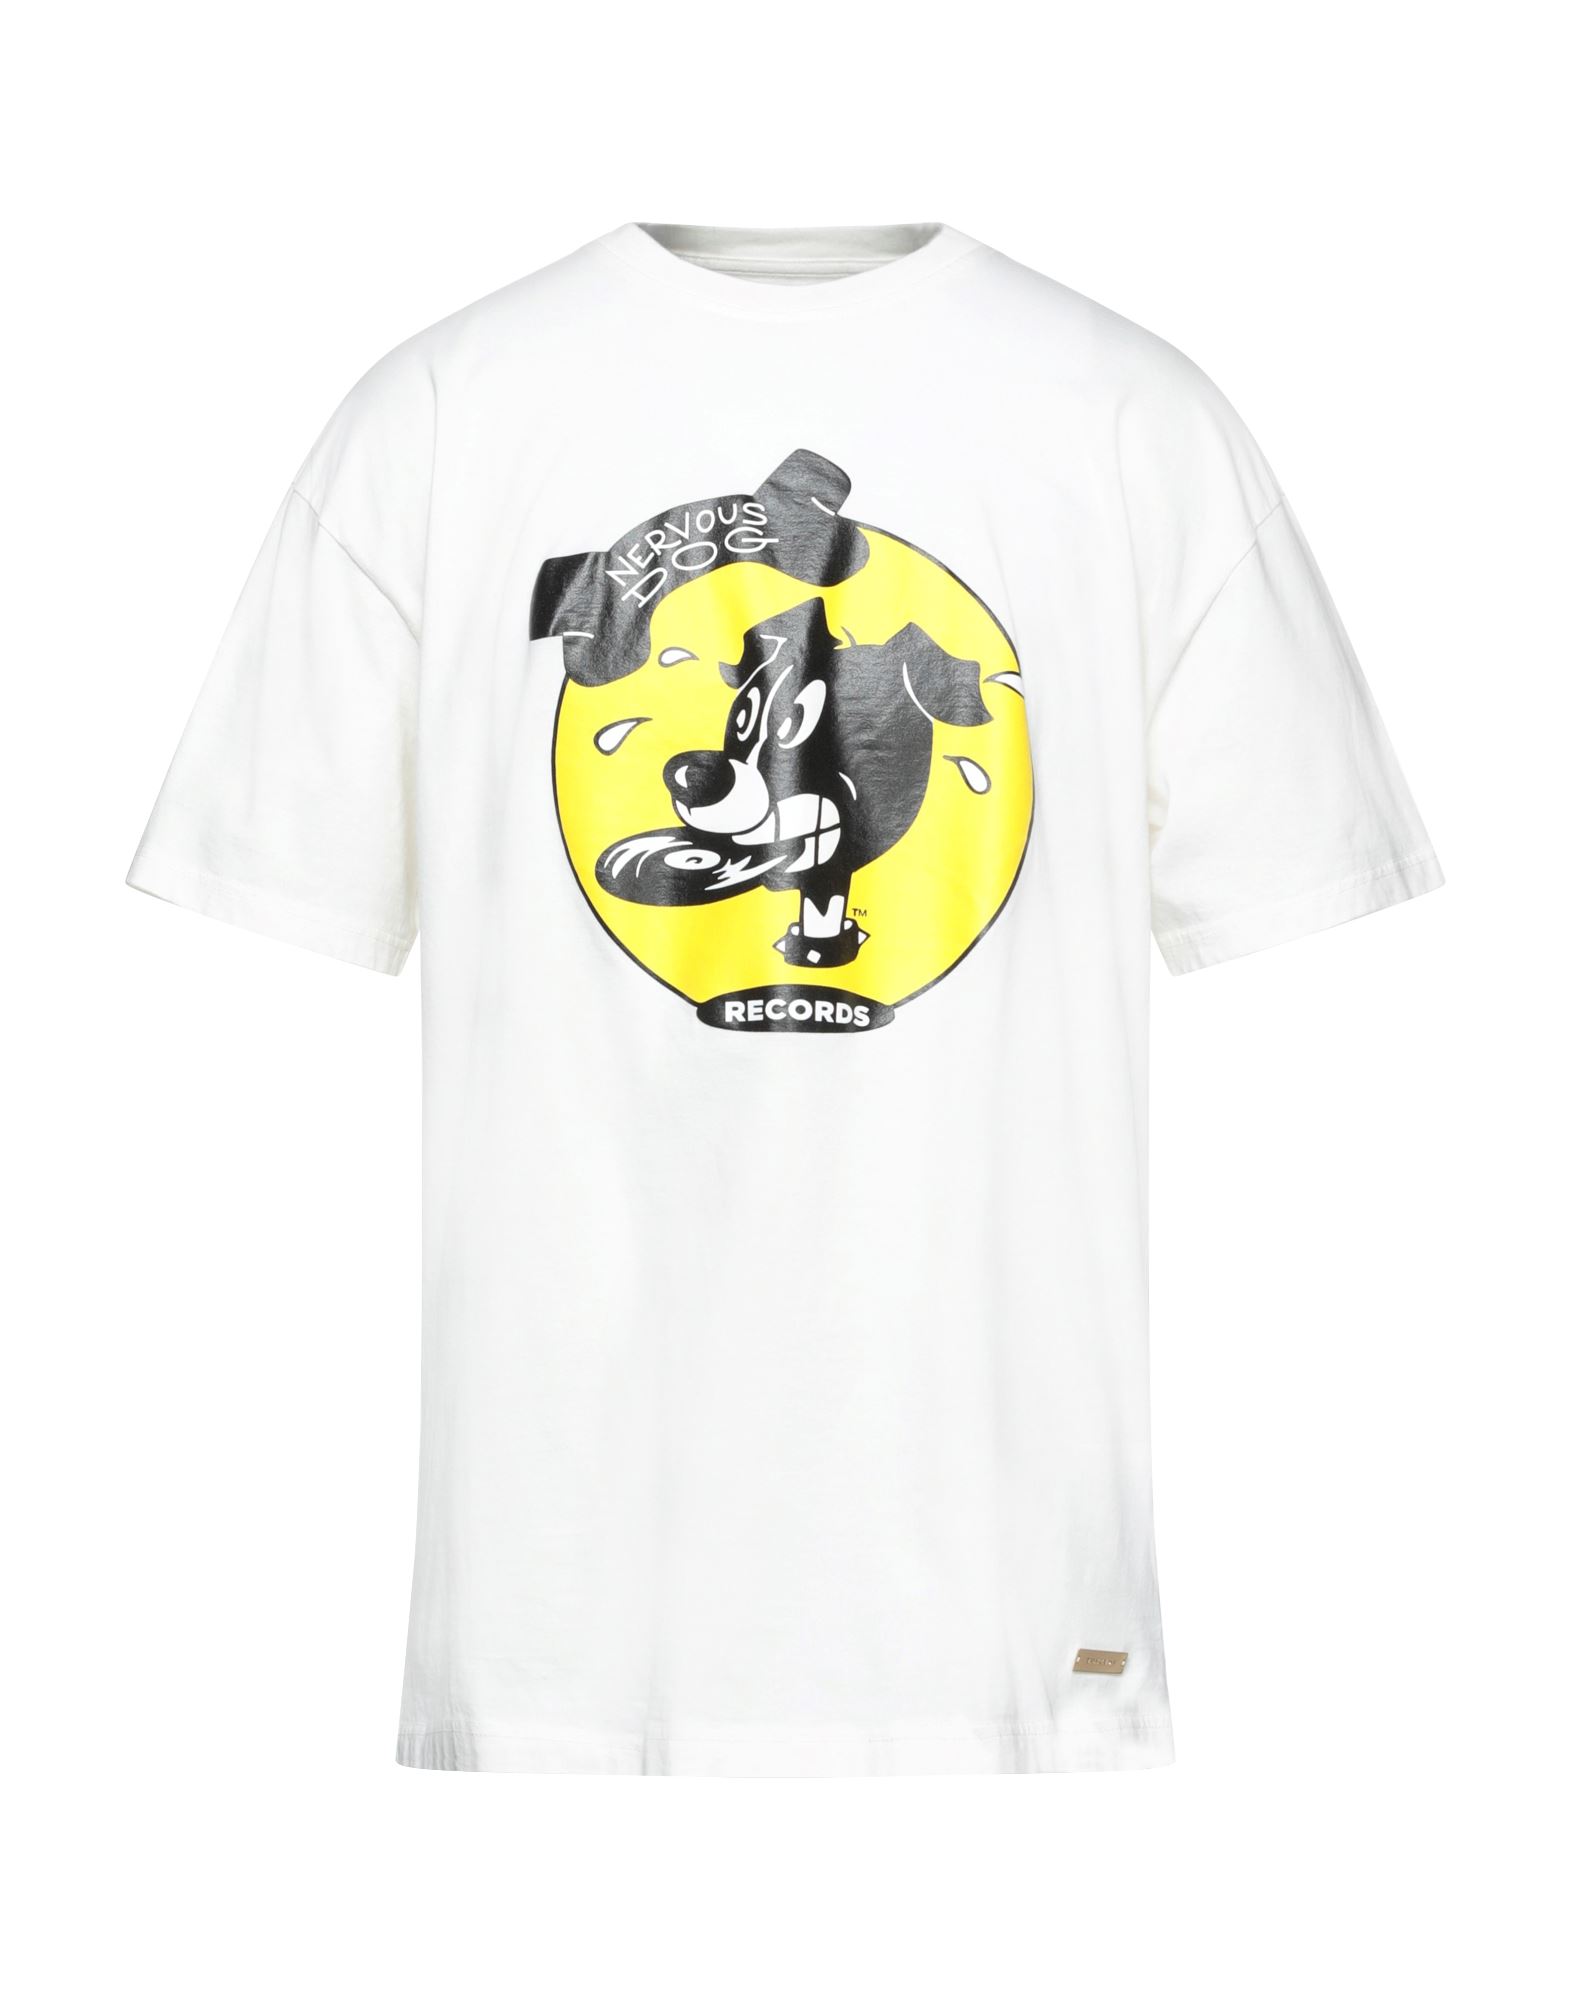 Buscemi T-shirts In Ivory